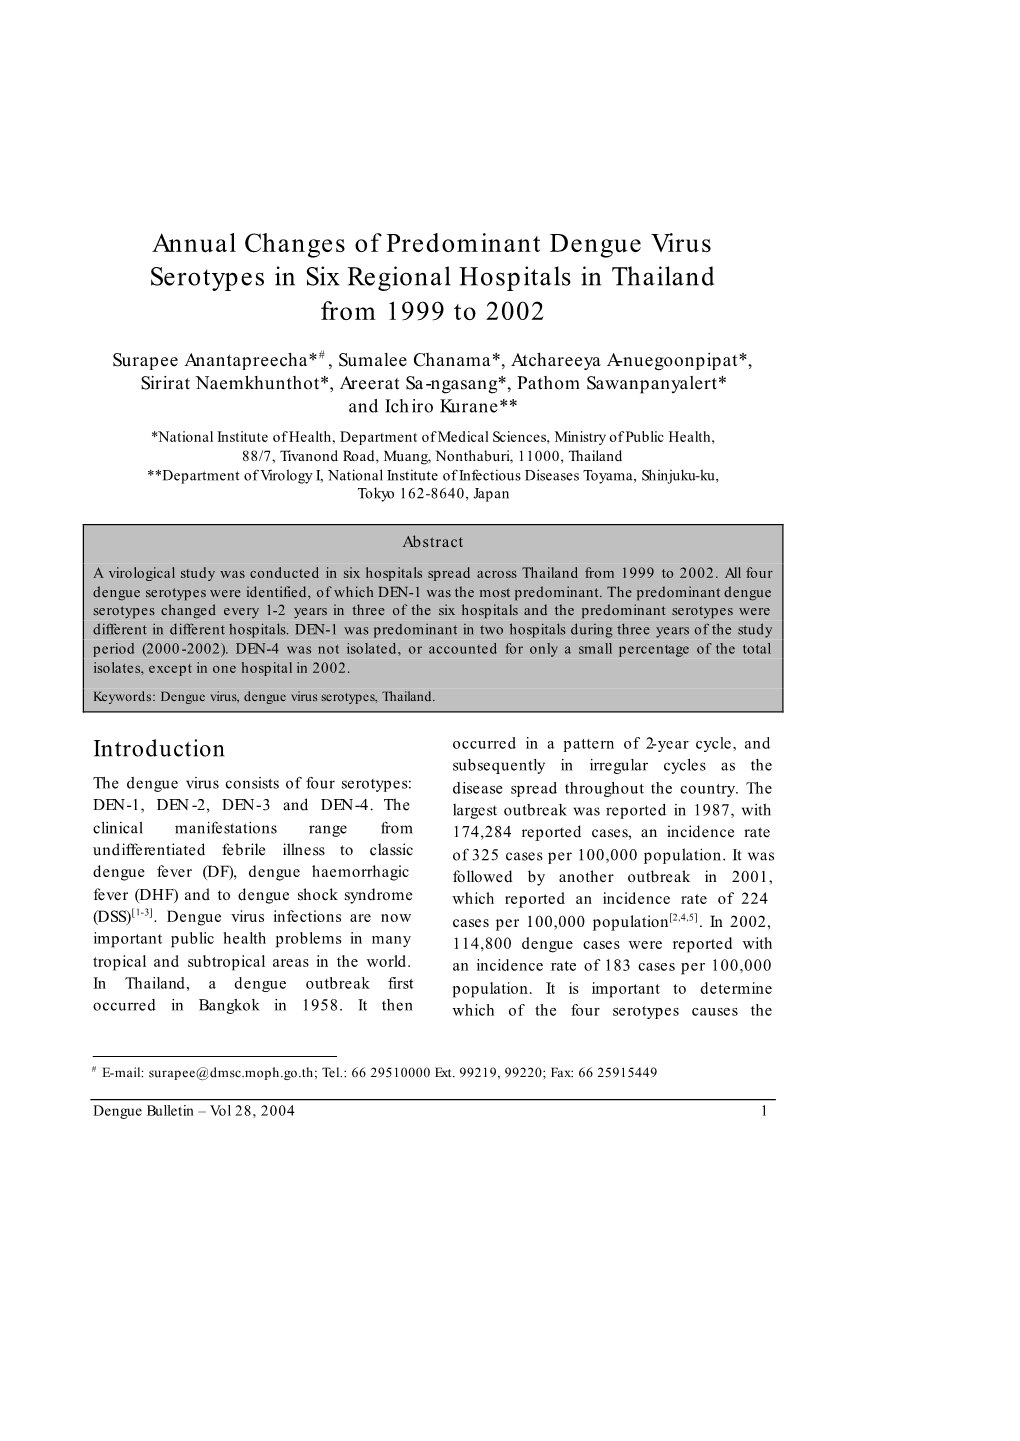 Annual Changes of Predominant Dengue Virus Serotypes in Six Regional Hospitals in Thailand from 1999 to 2002